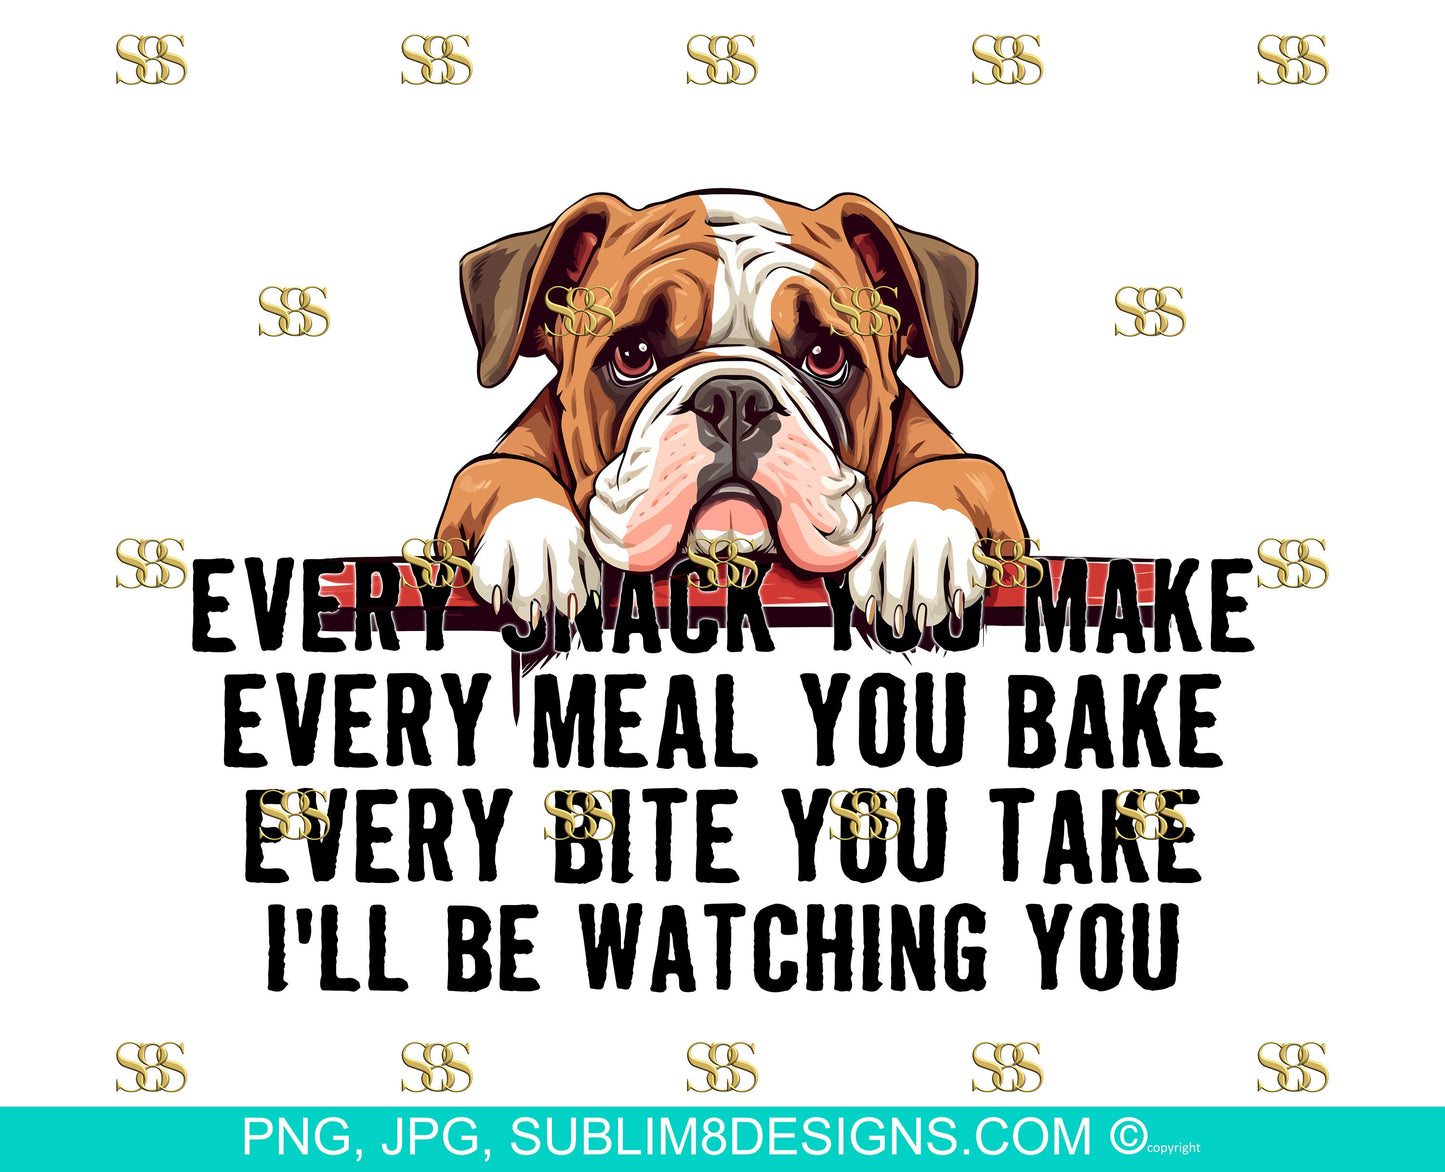 Snack-Obsessed Dog Bundle: The Hilarious Table Peeker! Every Bite You Take I'll Be Watching You 12 PNG and 12 JPEG ONLY